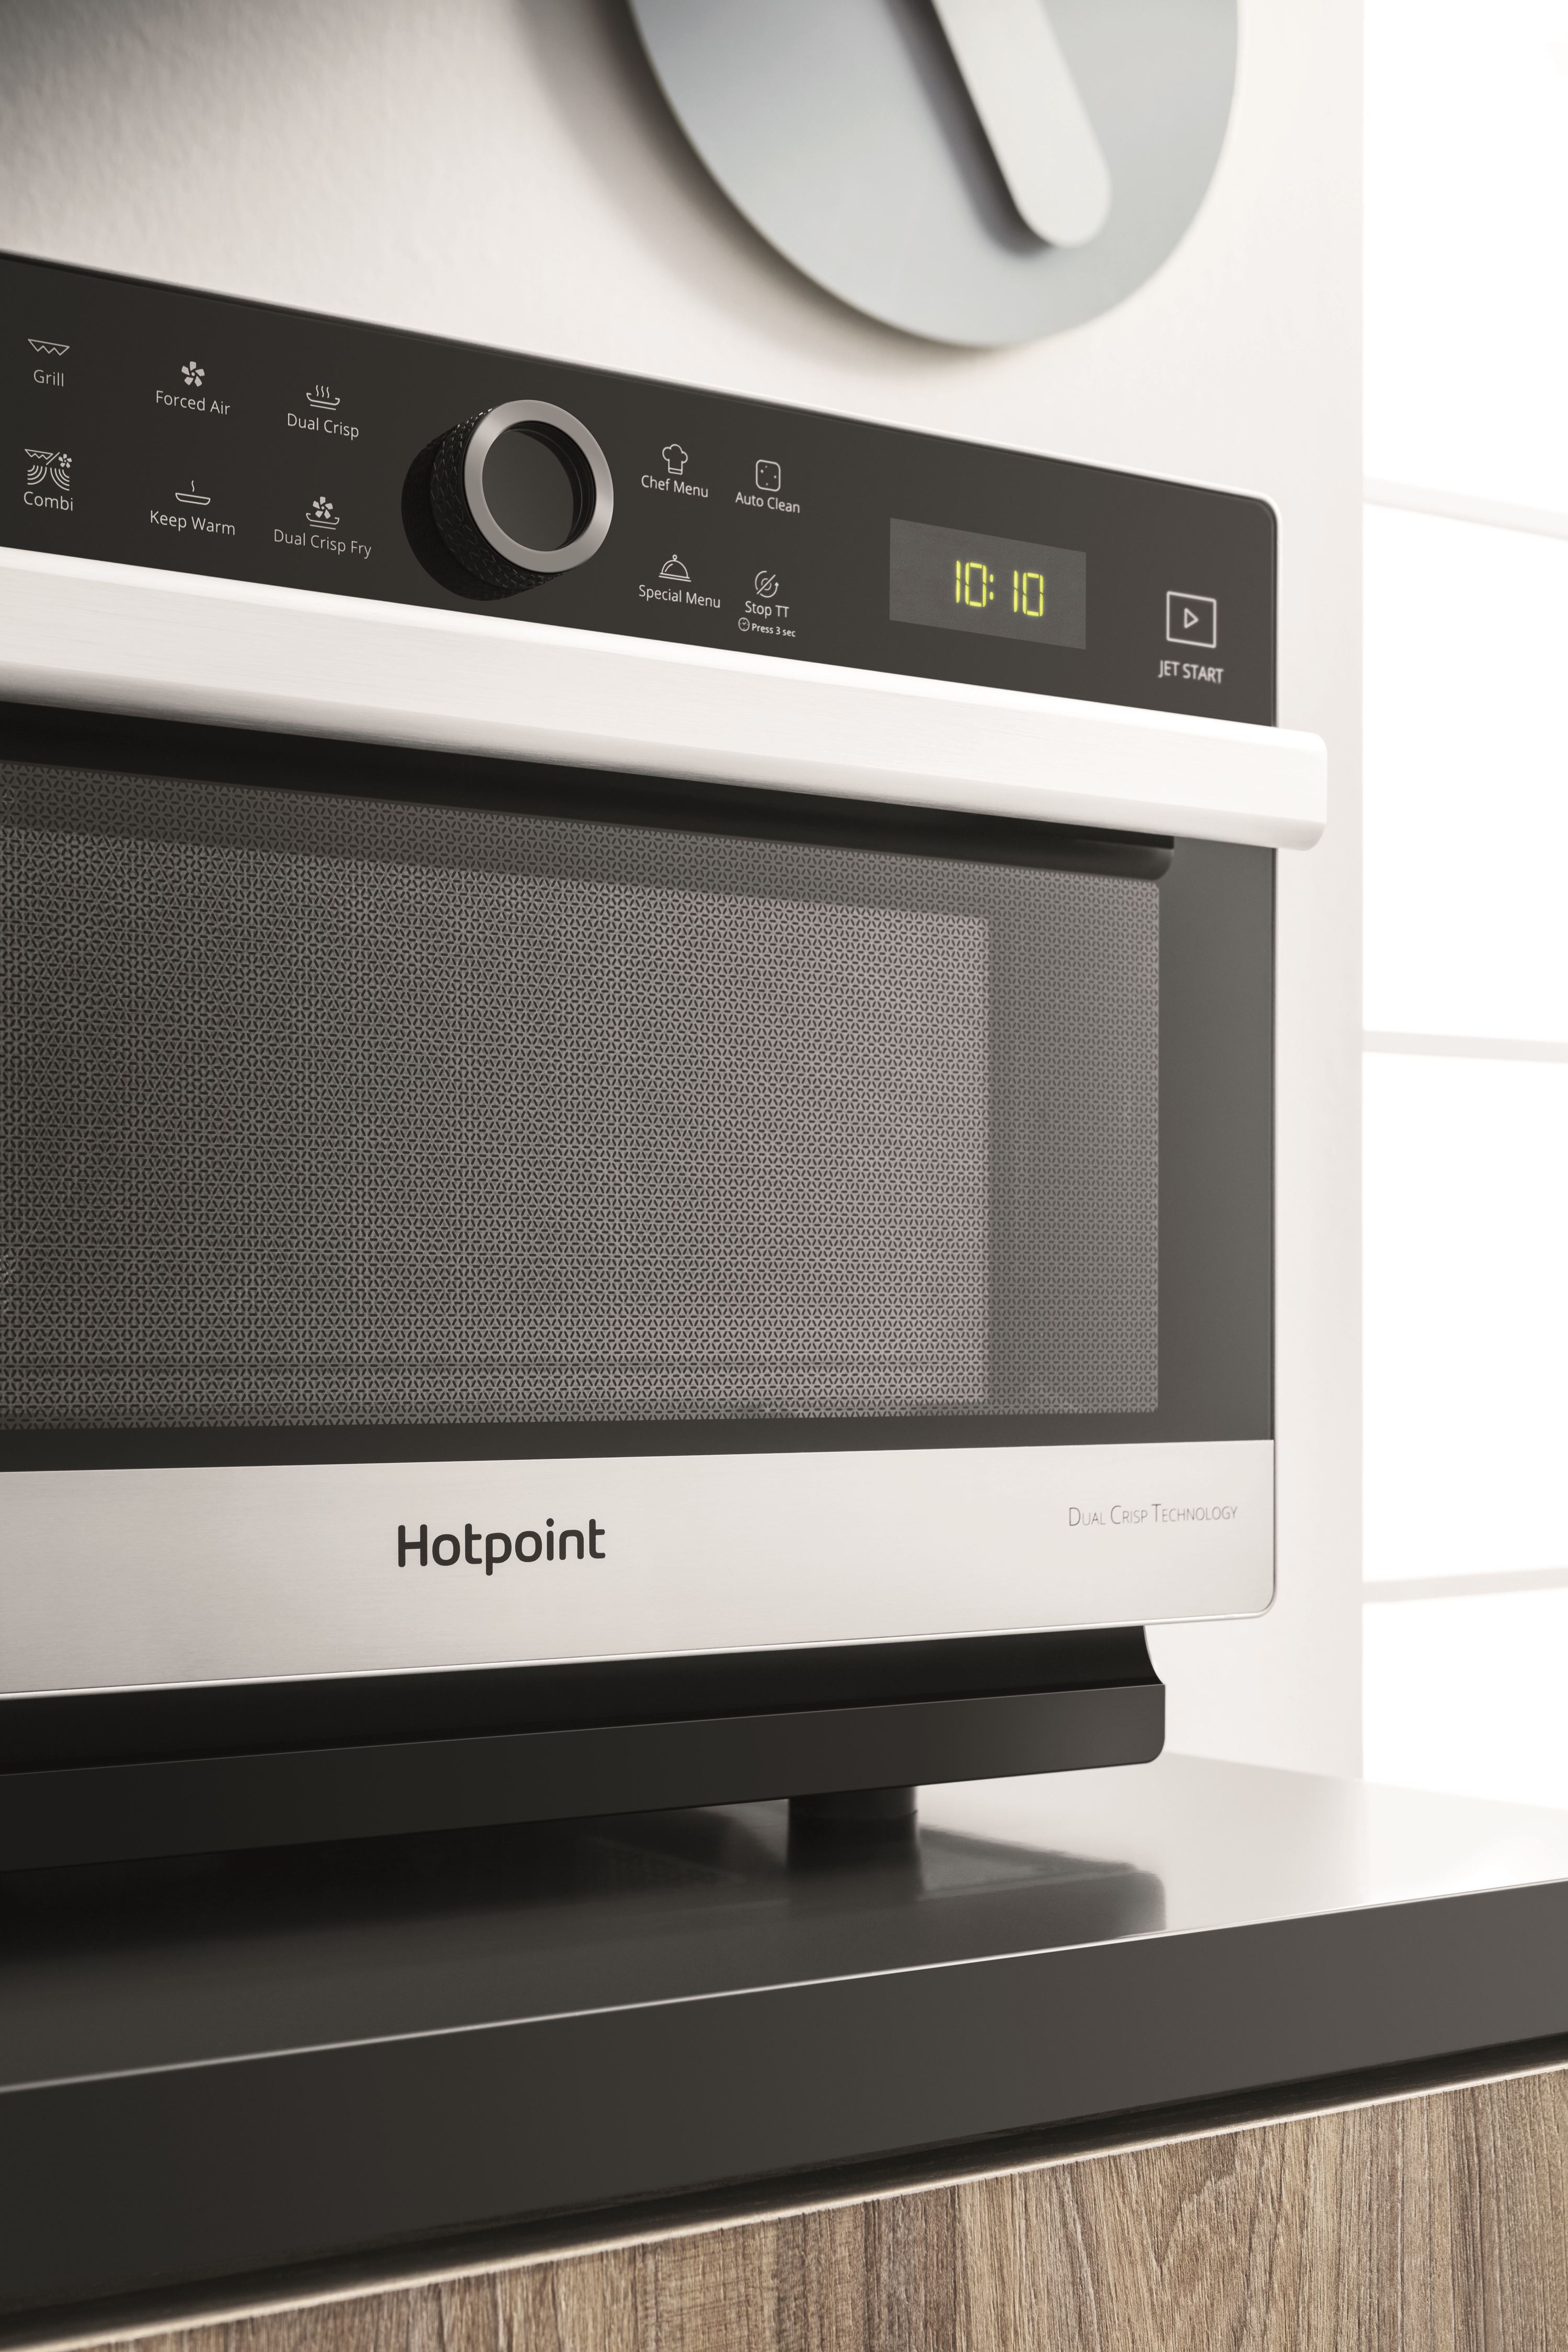 Order The Hotpoint Mwh 338 Sx Microwaves Today For Delivery Or Collection In Millom Power World Uk Ltd